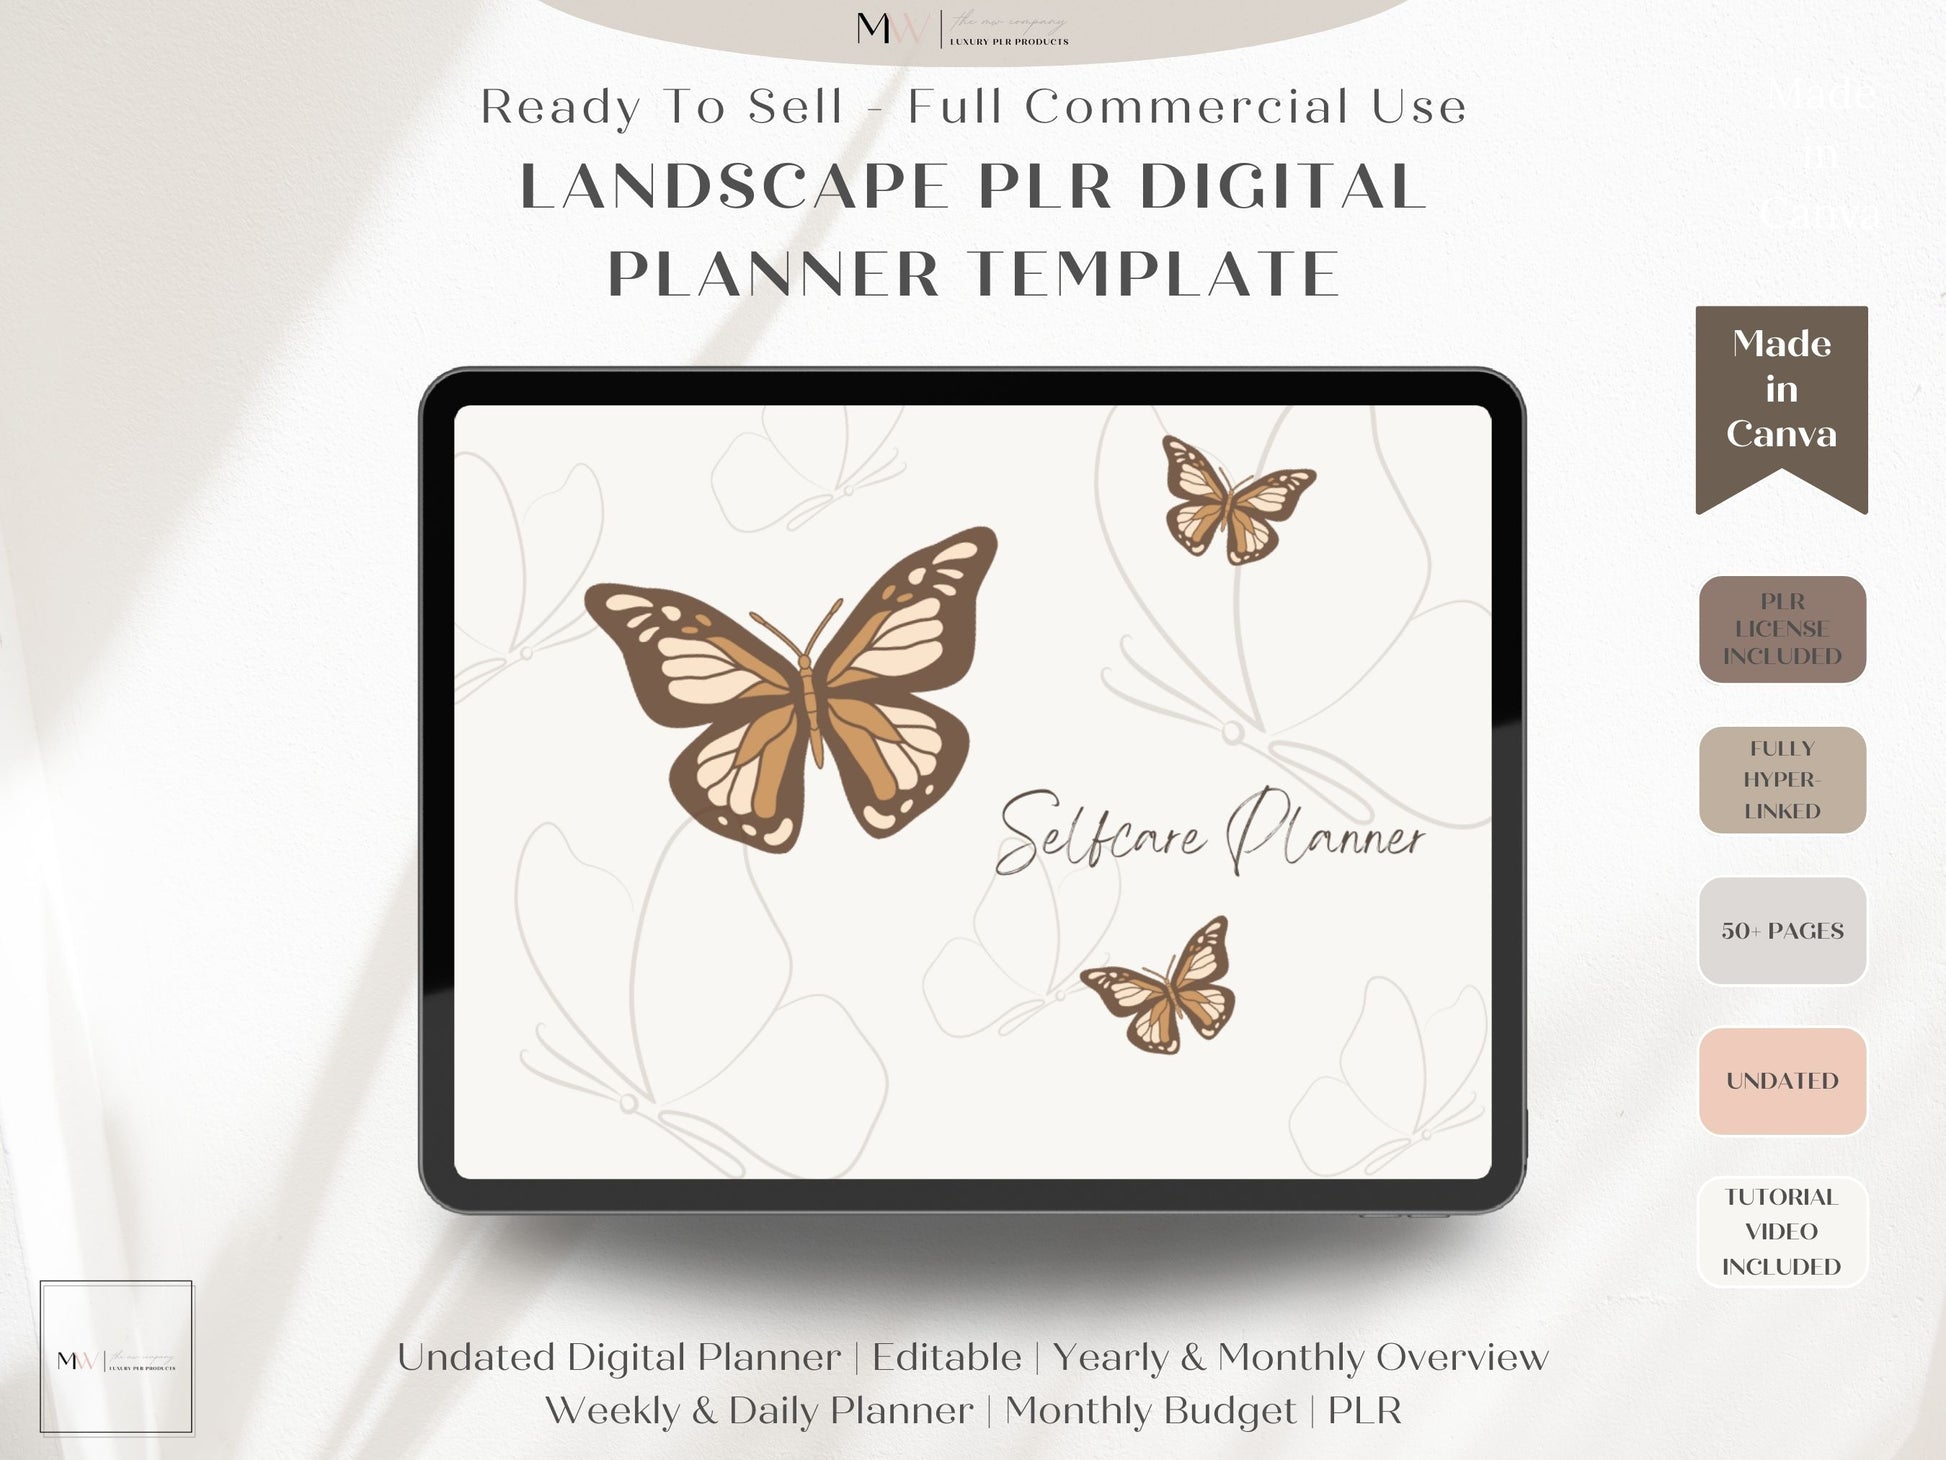 butterlfy boho neutral tones digital self care planner show on an ipad using goodnotes. Made in canva.